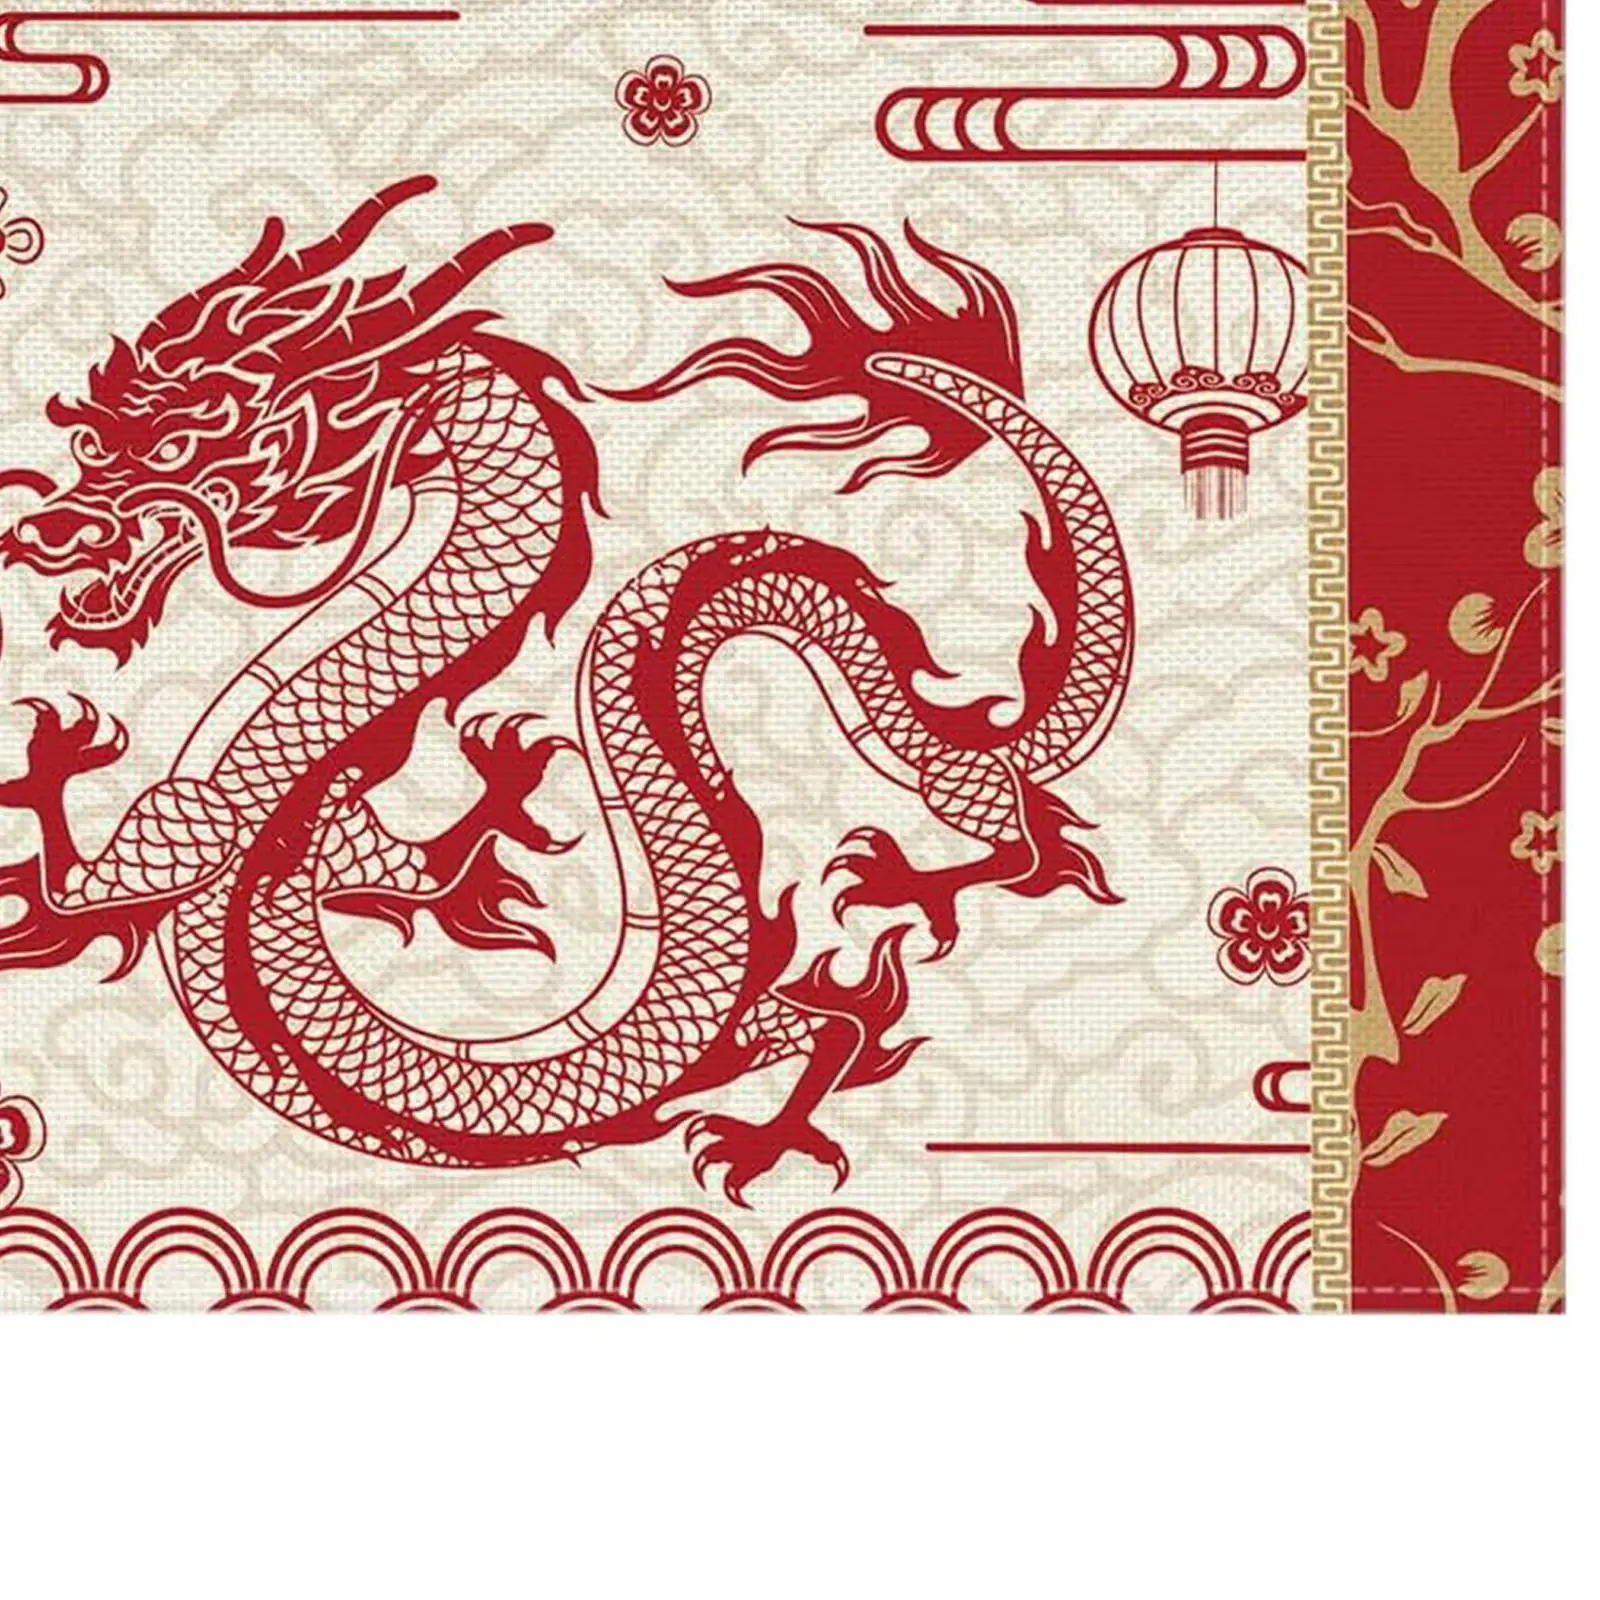 Chinese New Year Placemats Place Mats Set of 4 Happy New Year Table Decoration